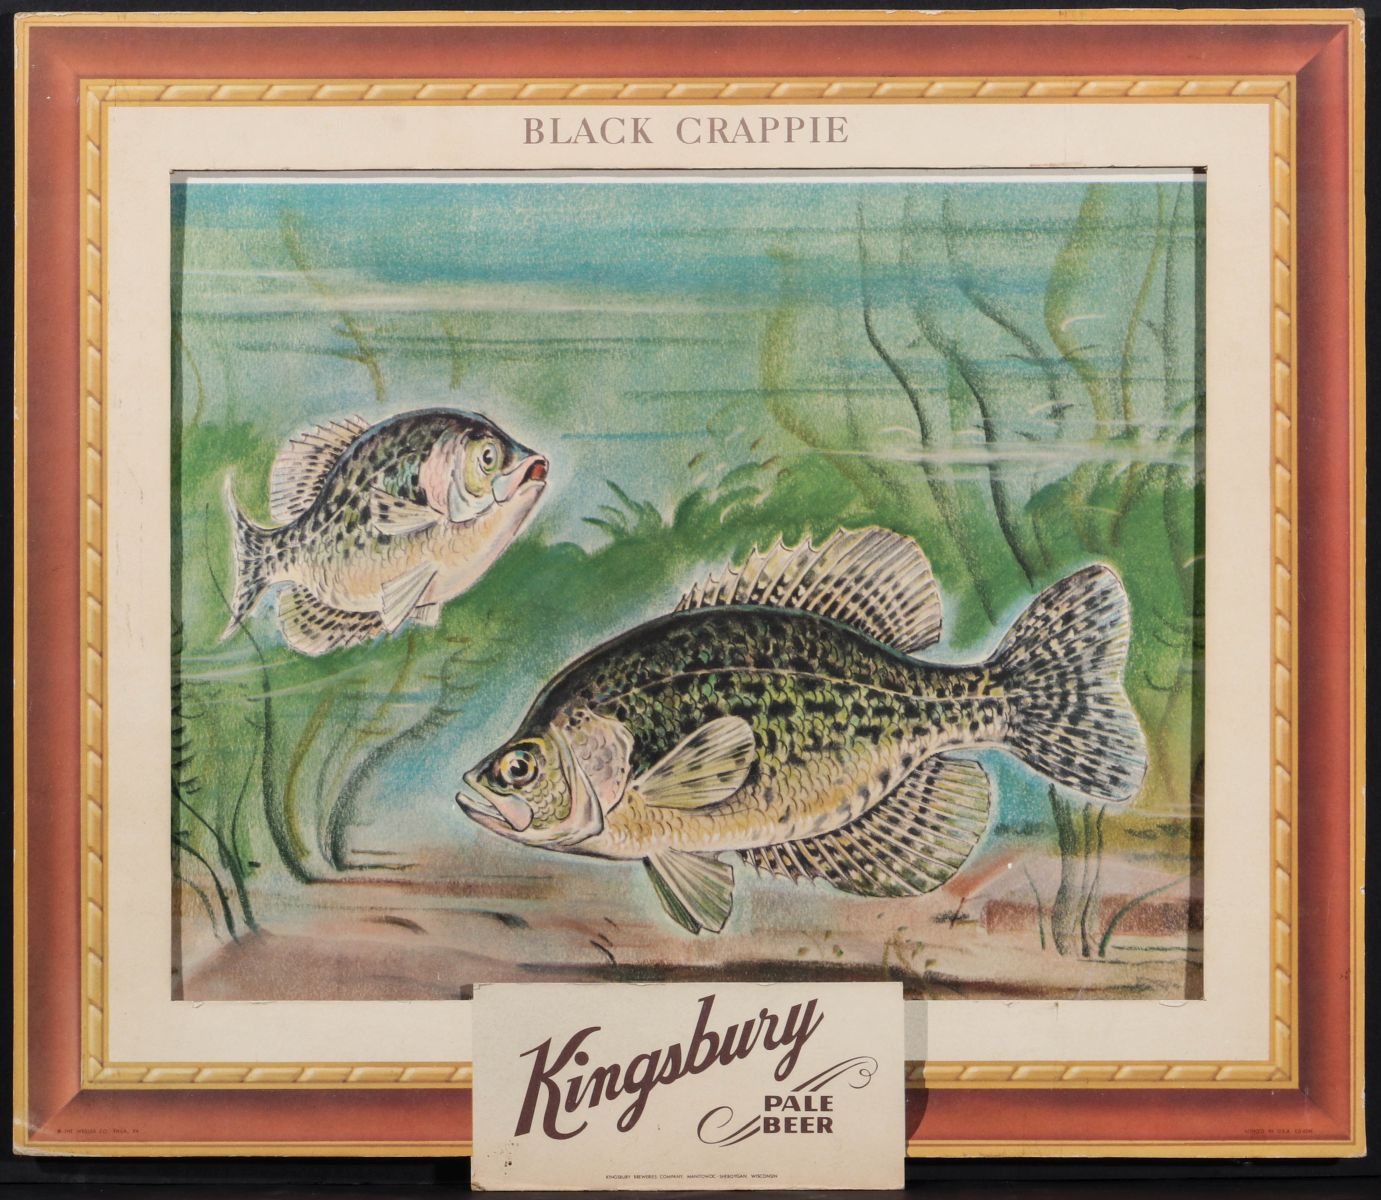 KINGSBURY BREWERIES ADVERTISING SIGN WITH CRAPPIE FISH